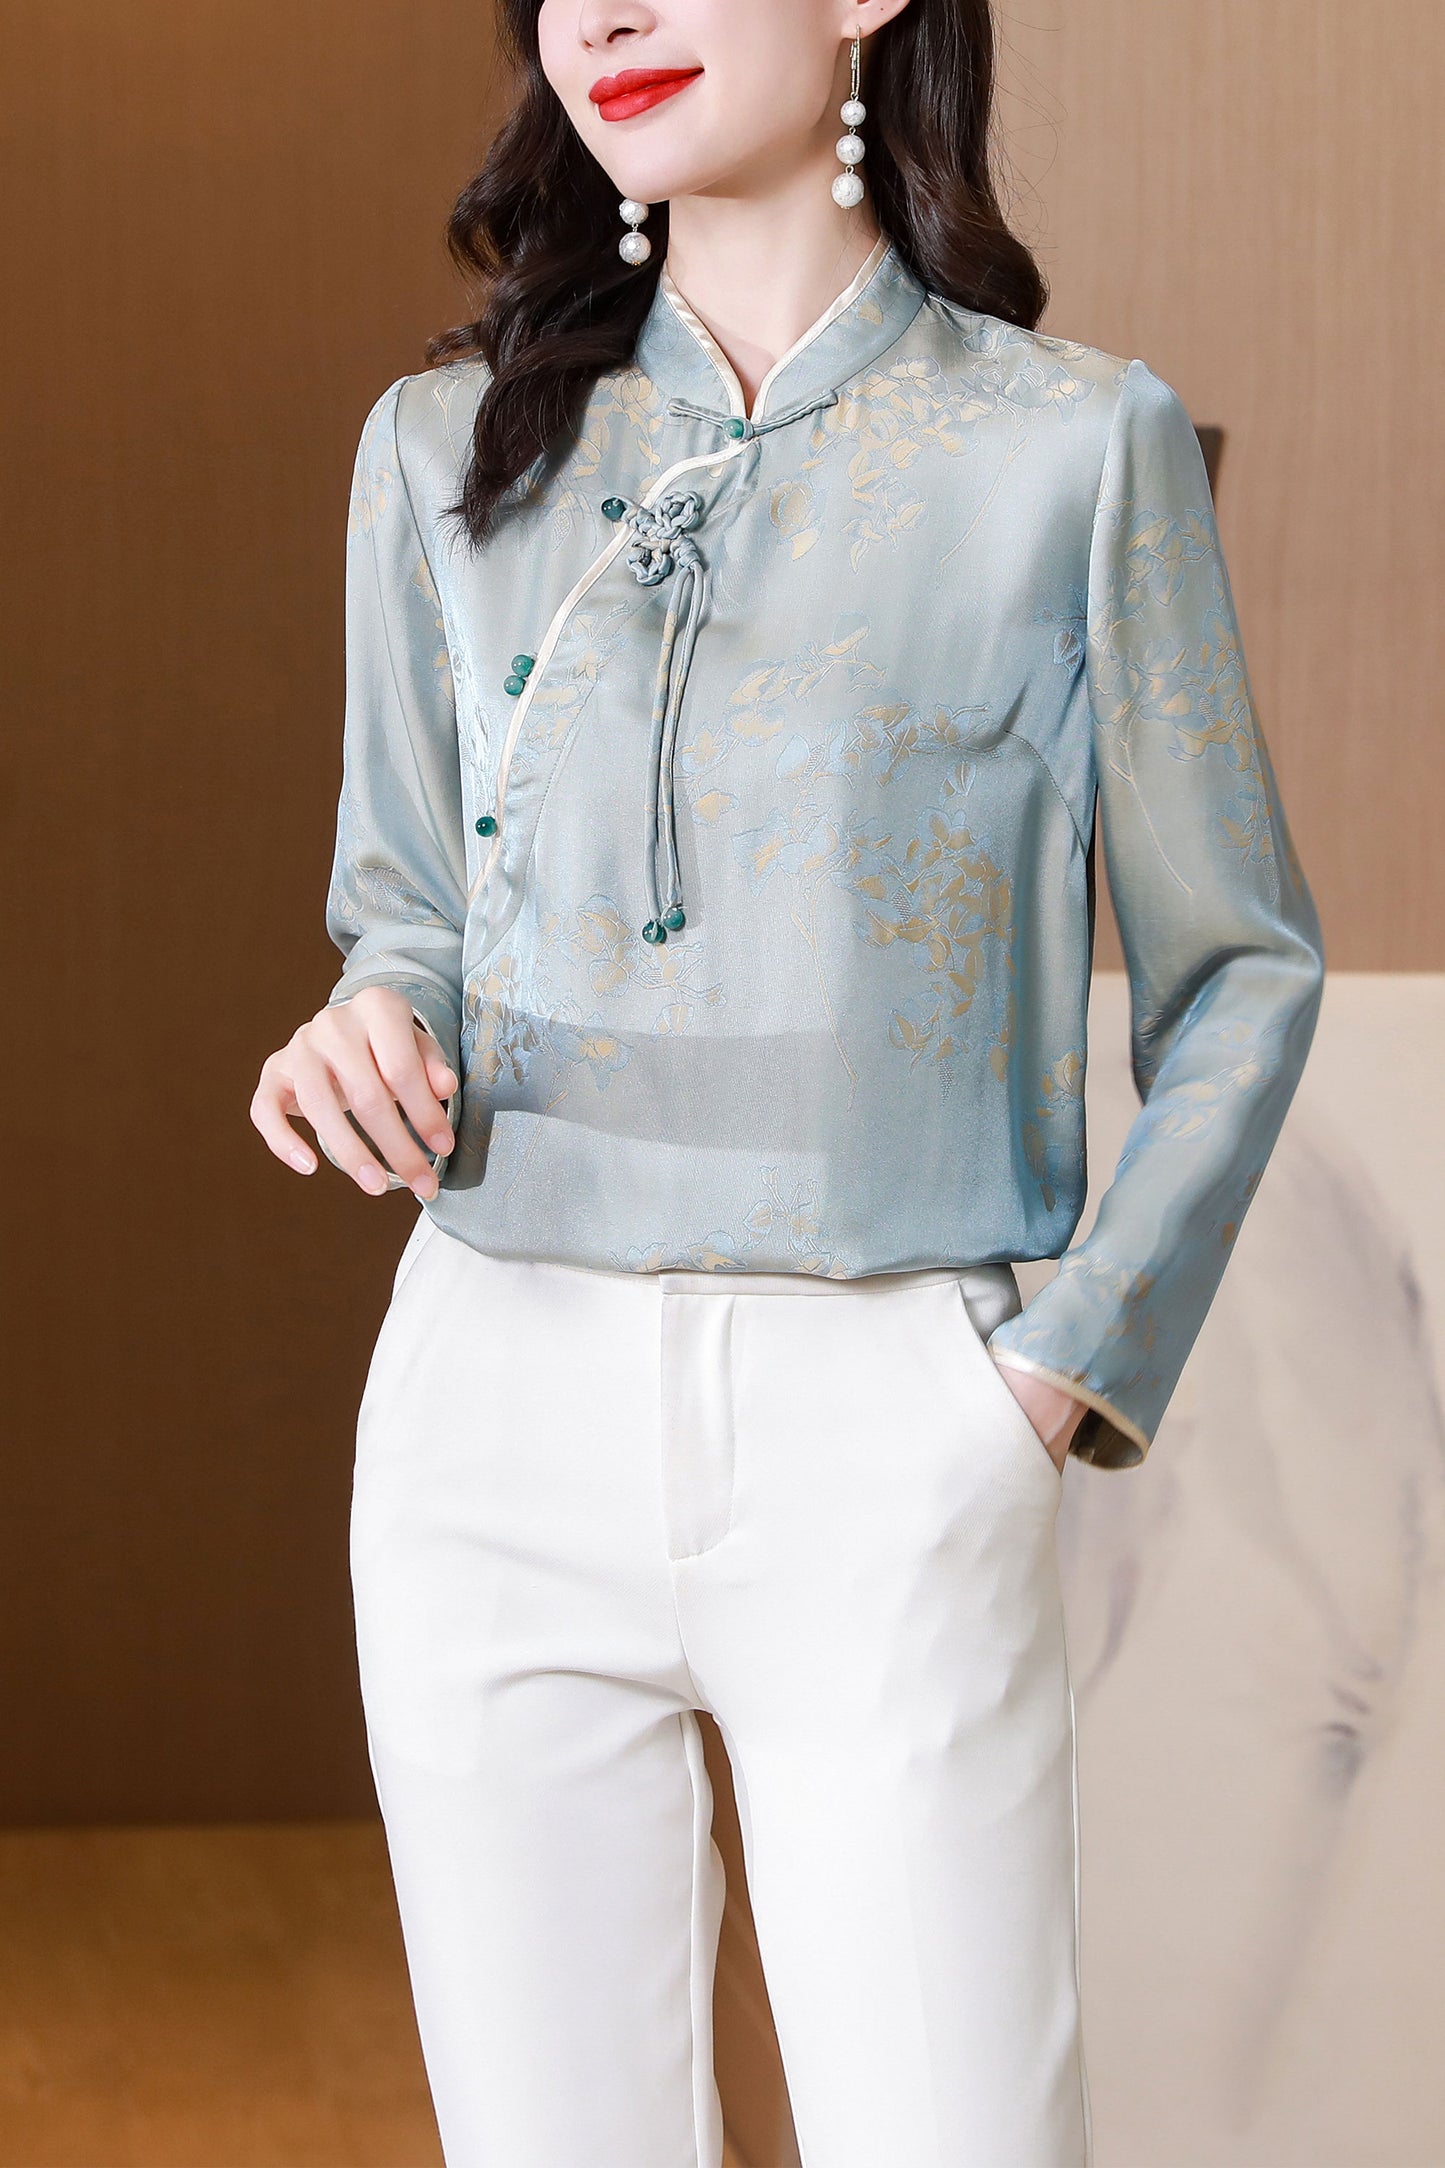 Women's Satin Blouse Chinese style Button Casual Tops